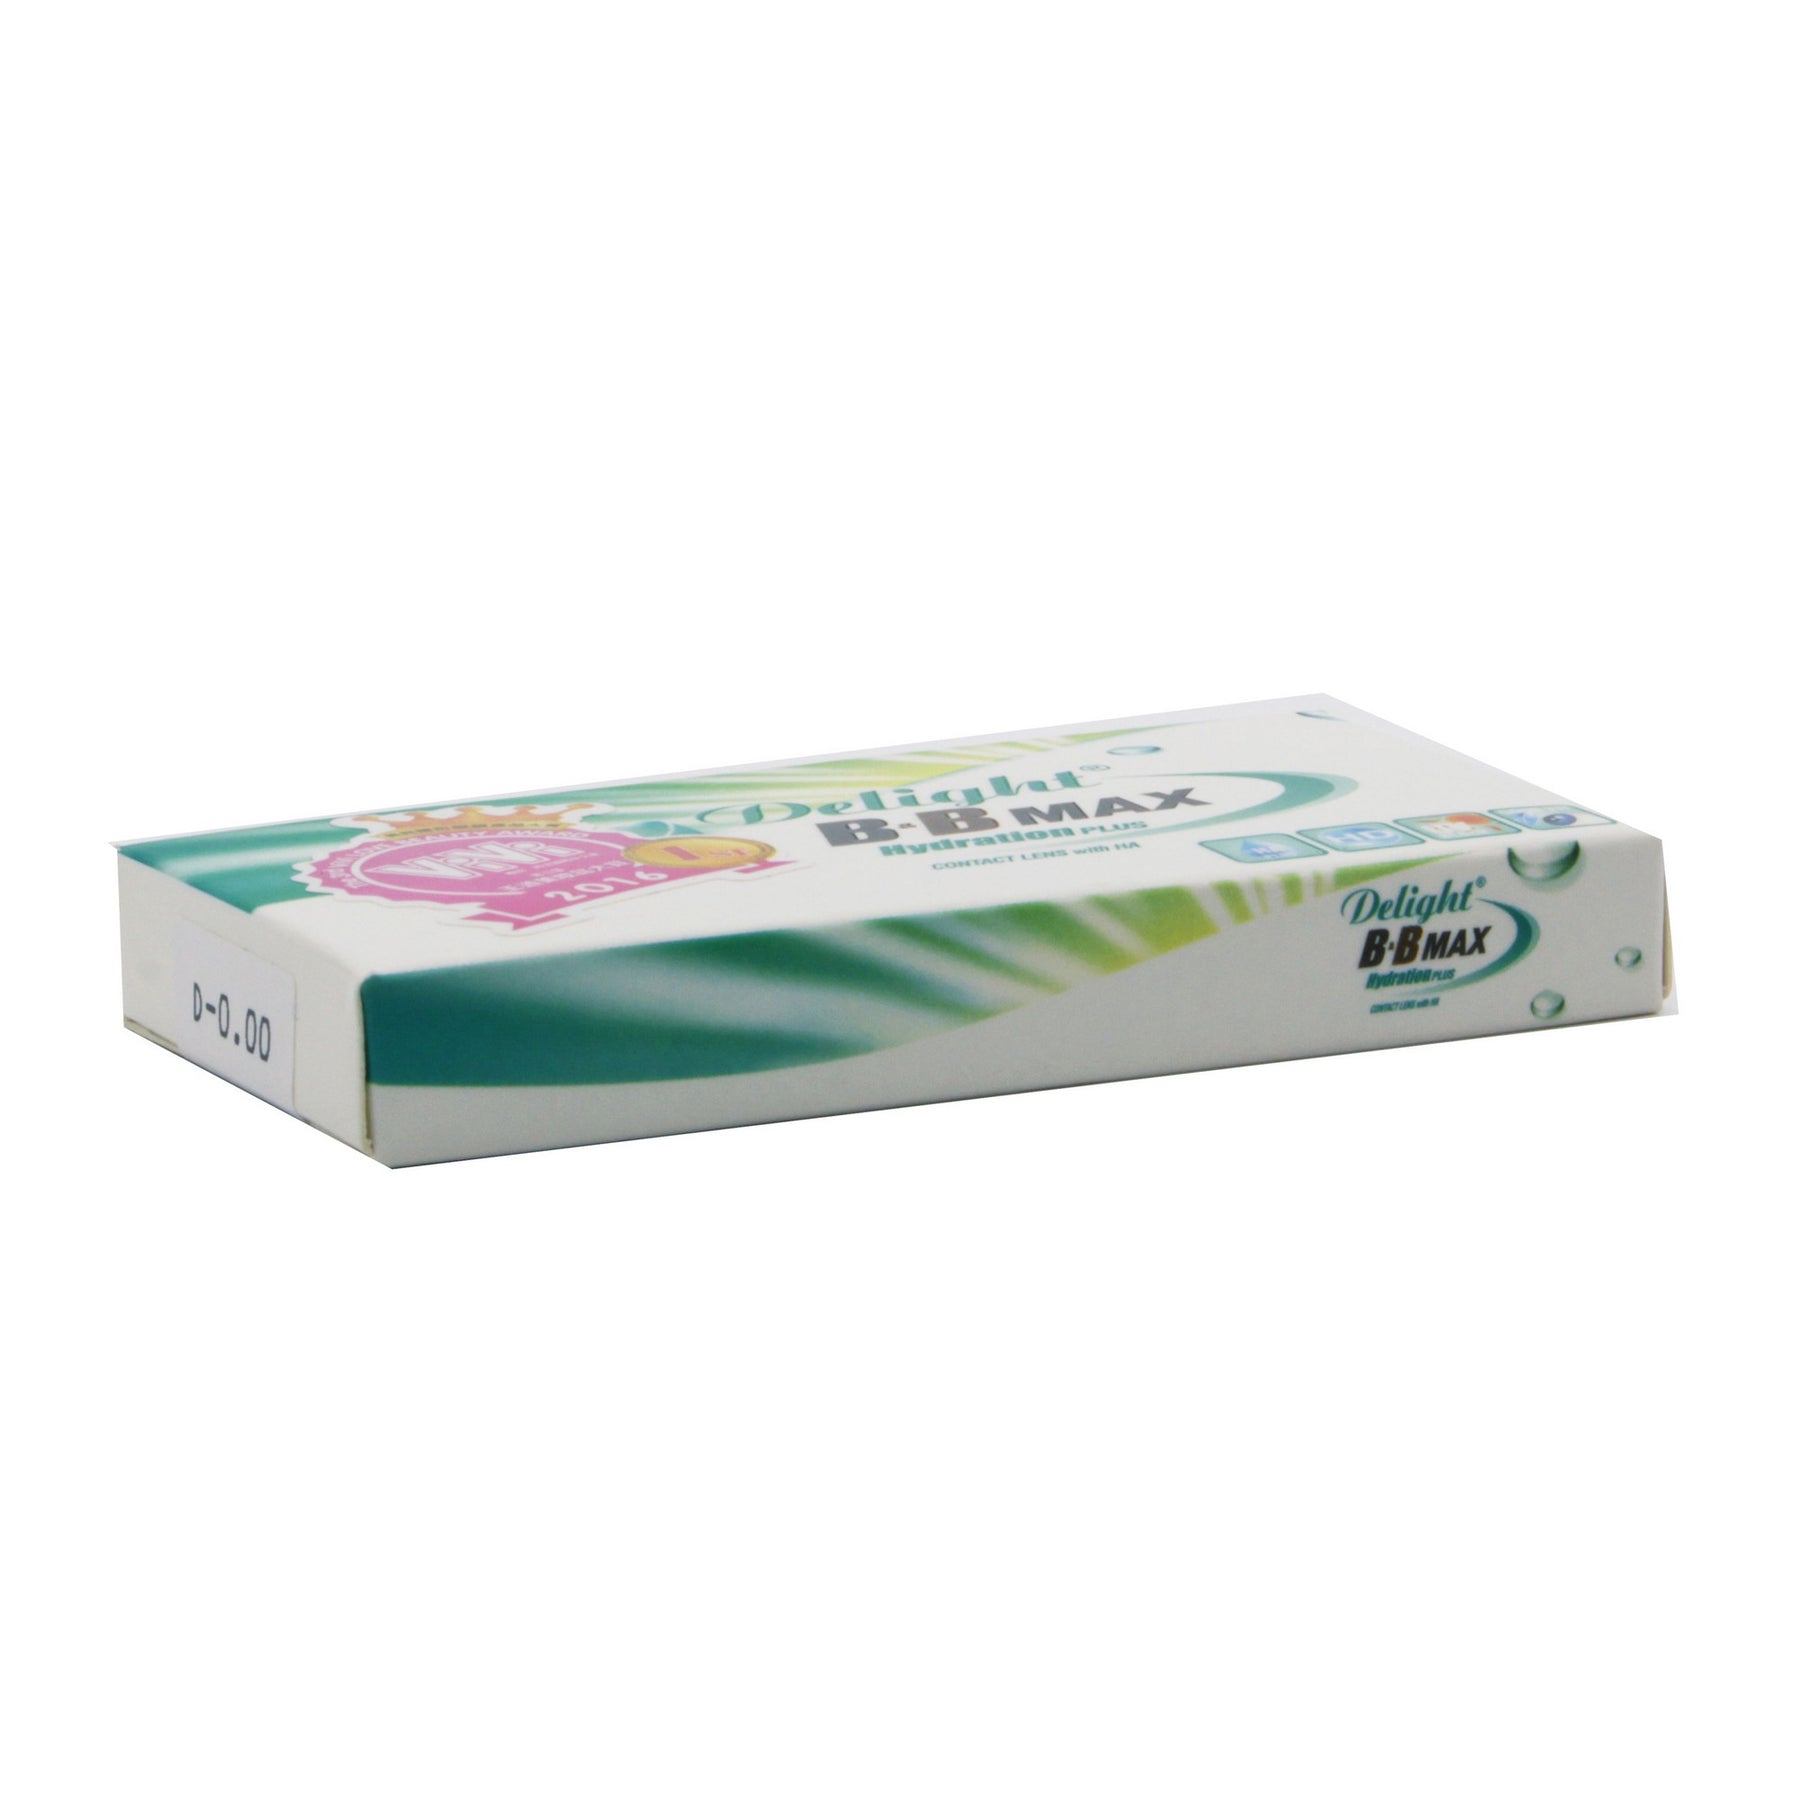 DELIGHT B&amp;B Max Hydration Plus monthly disposable colored contact lenses